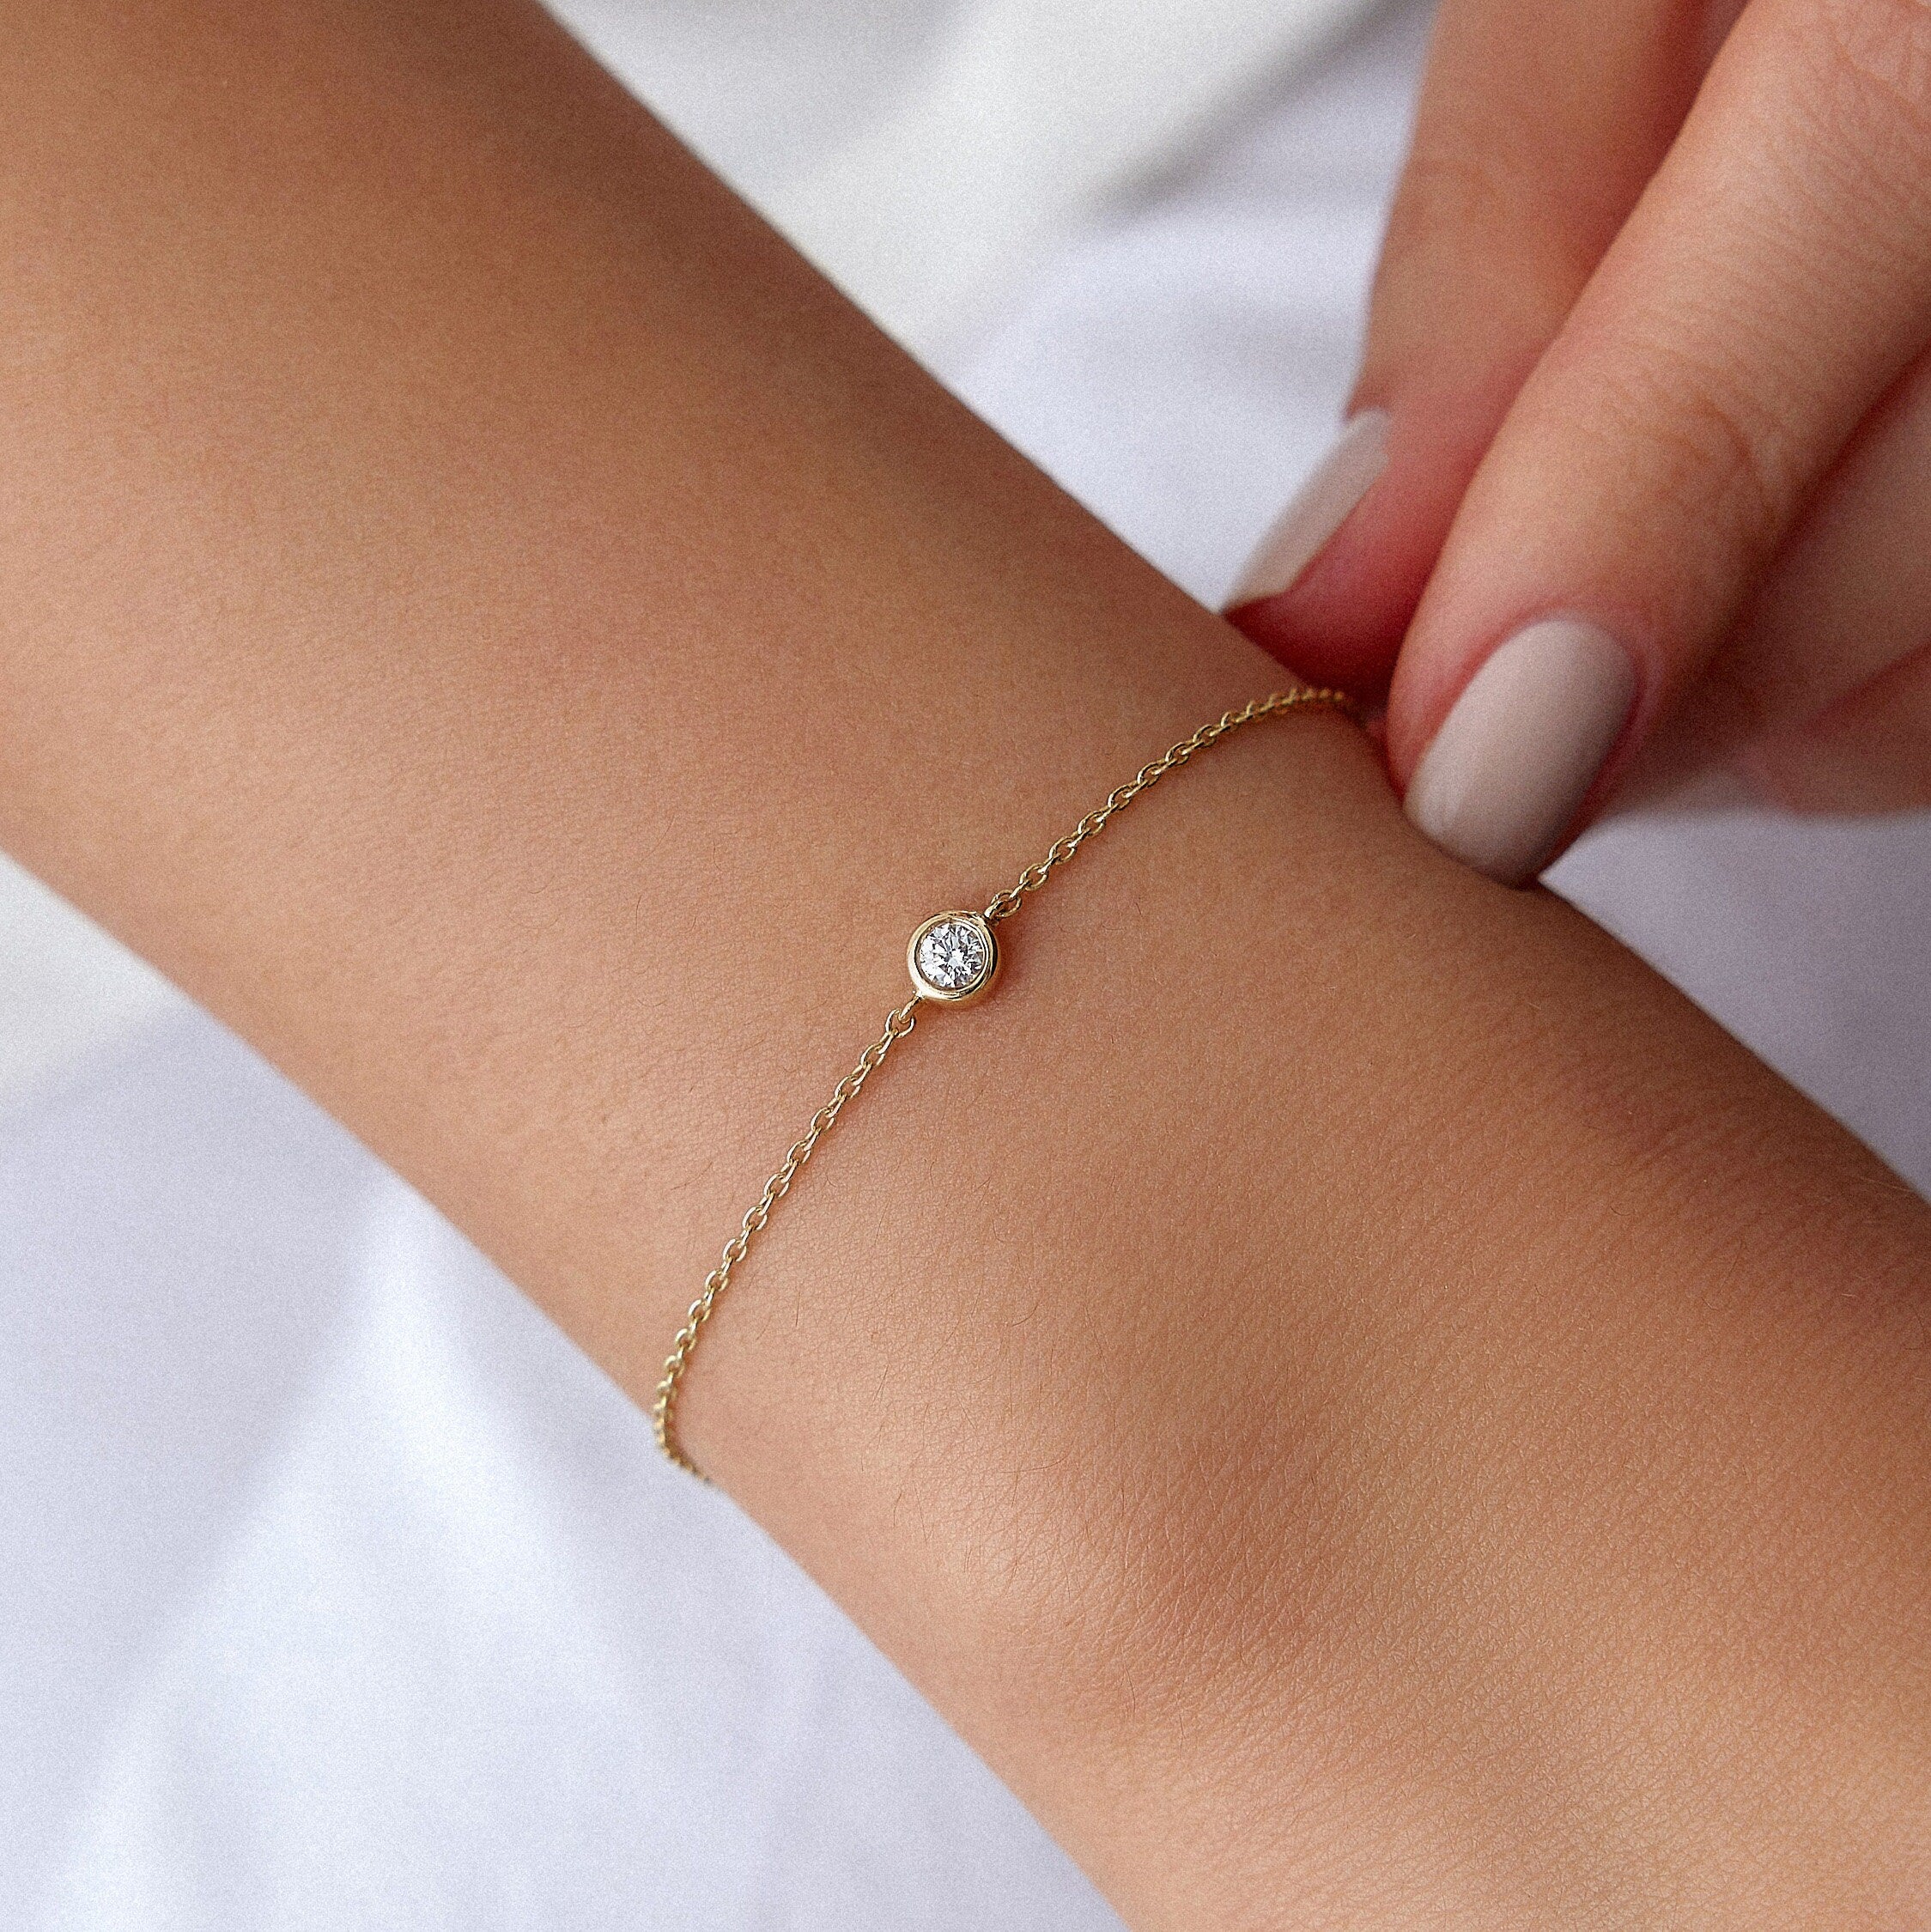 Diamond Solitaire Bracelet Available in 14K and 18K Gold